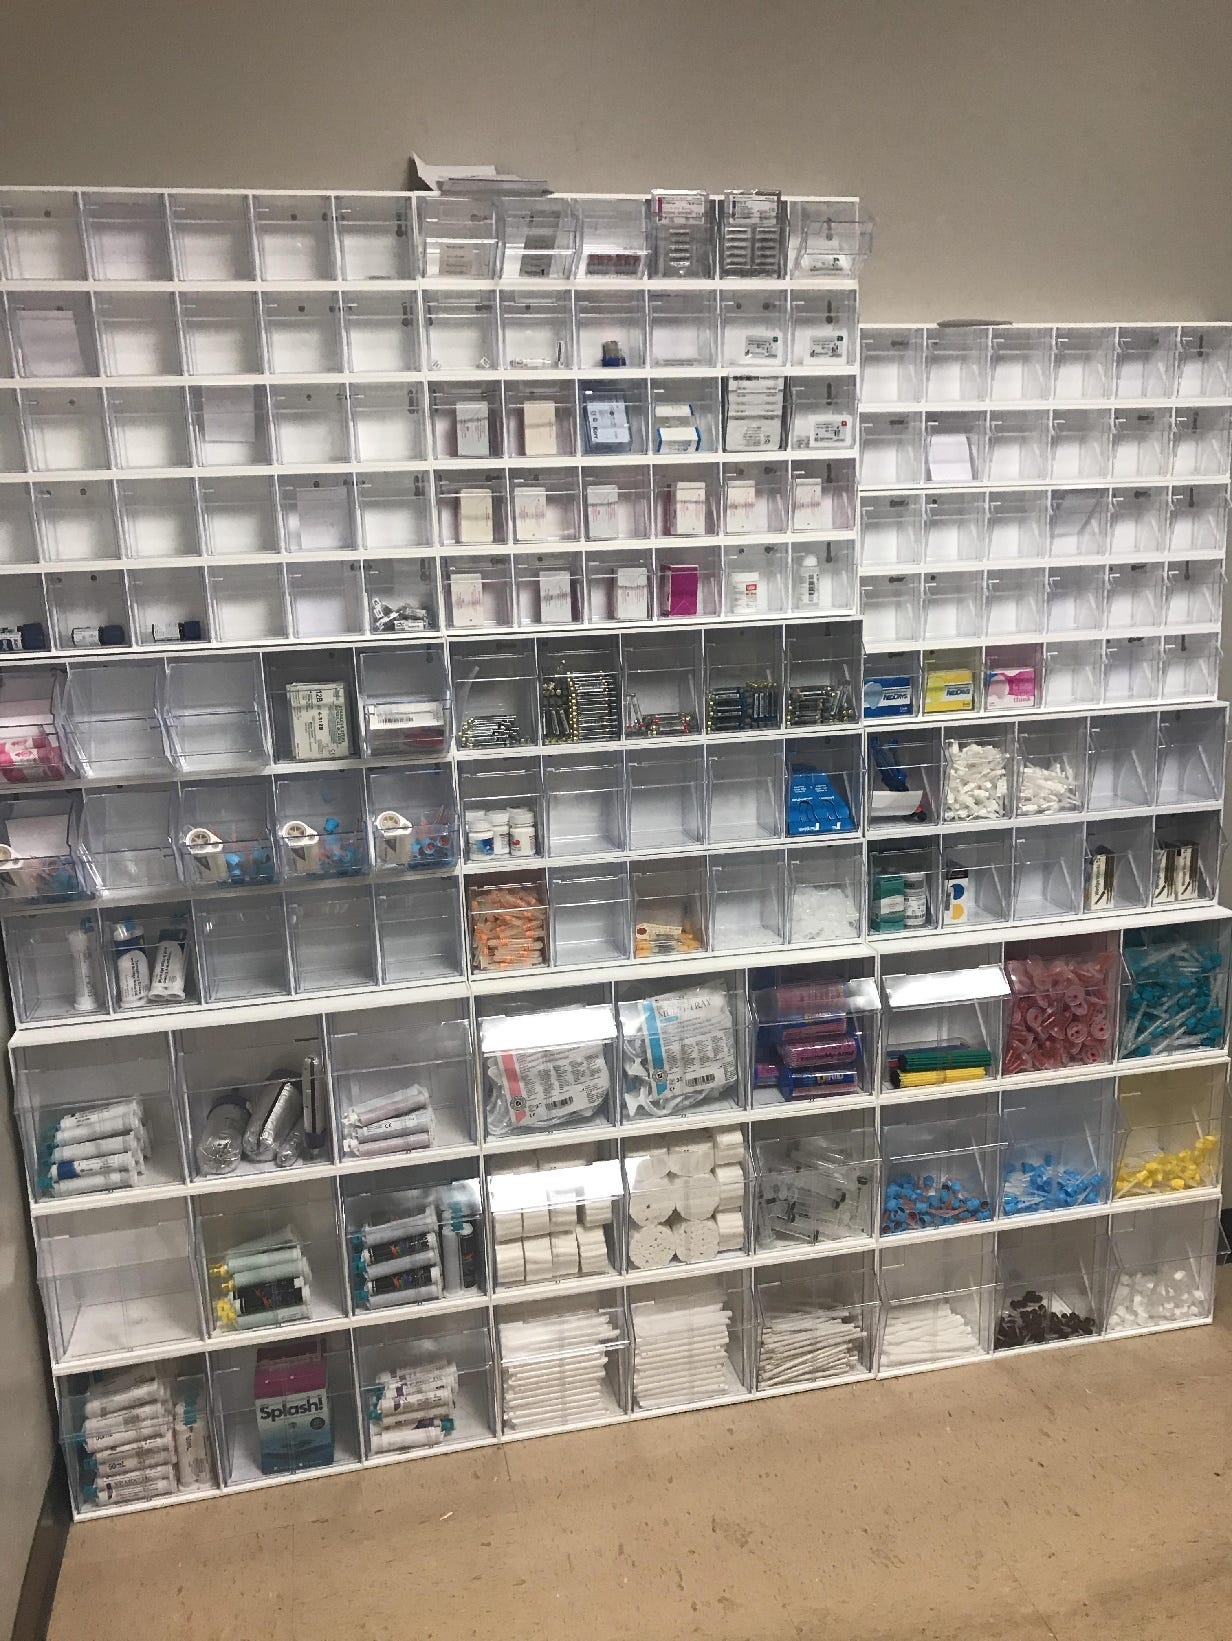 Ready, Set, Get Your Dental Supplies Organized with Tip Out Bins, by Ben  Gonzalez